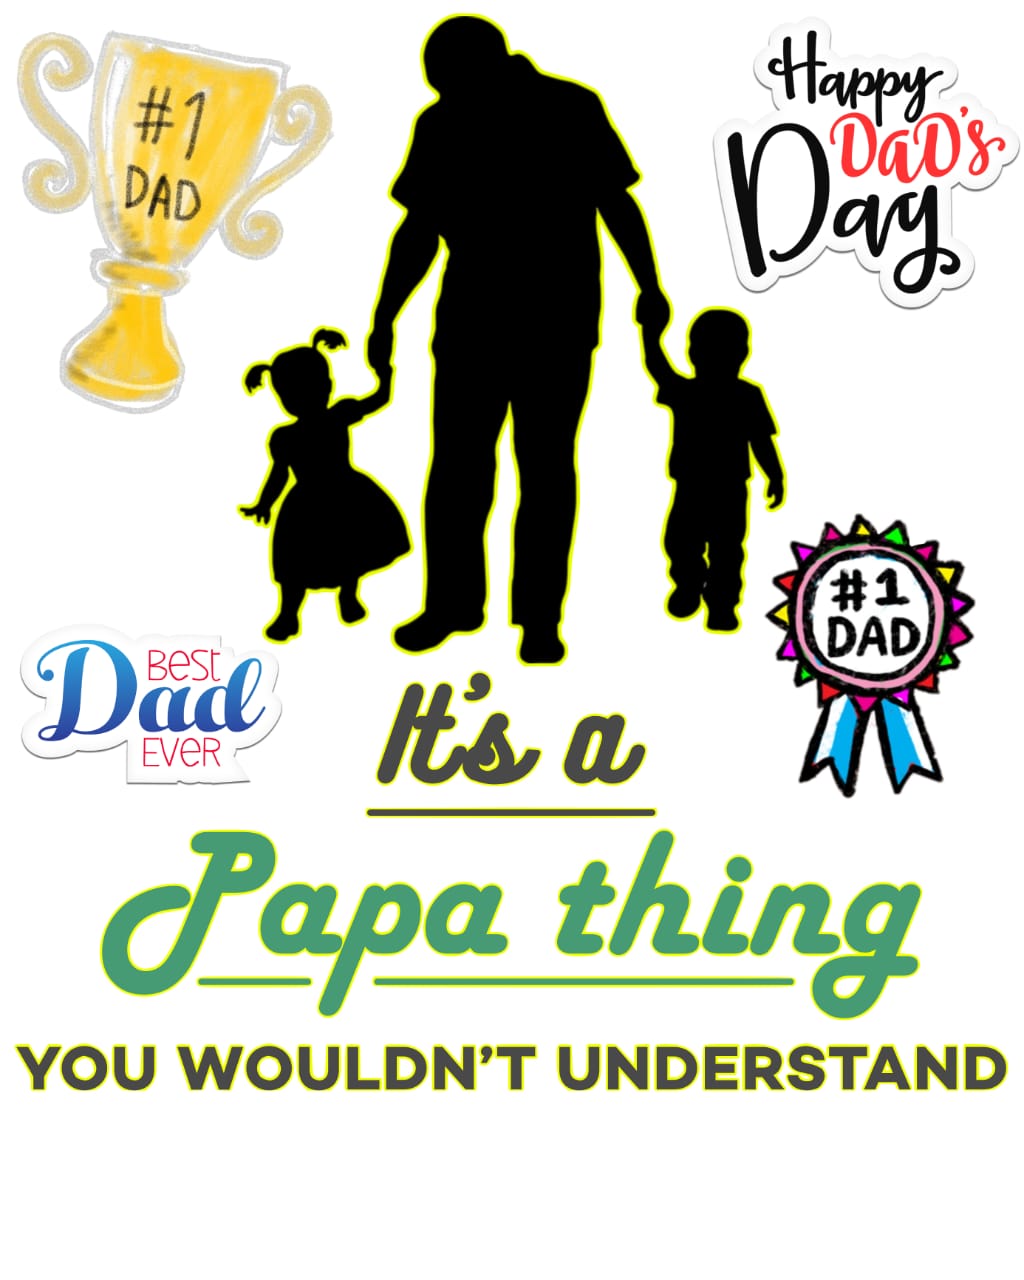 Fathers Day images photos and wallpapers